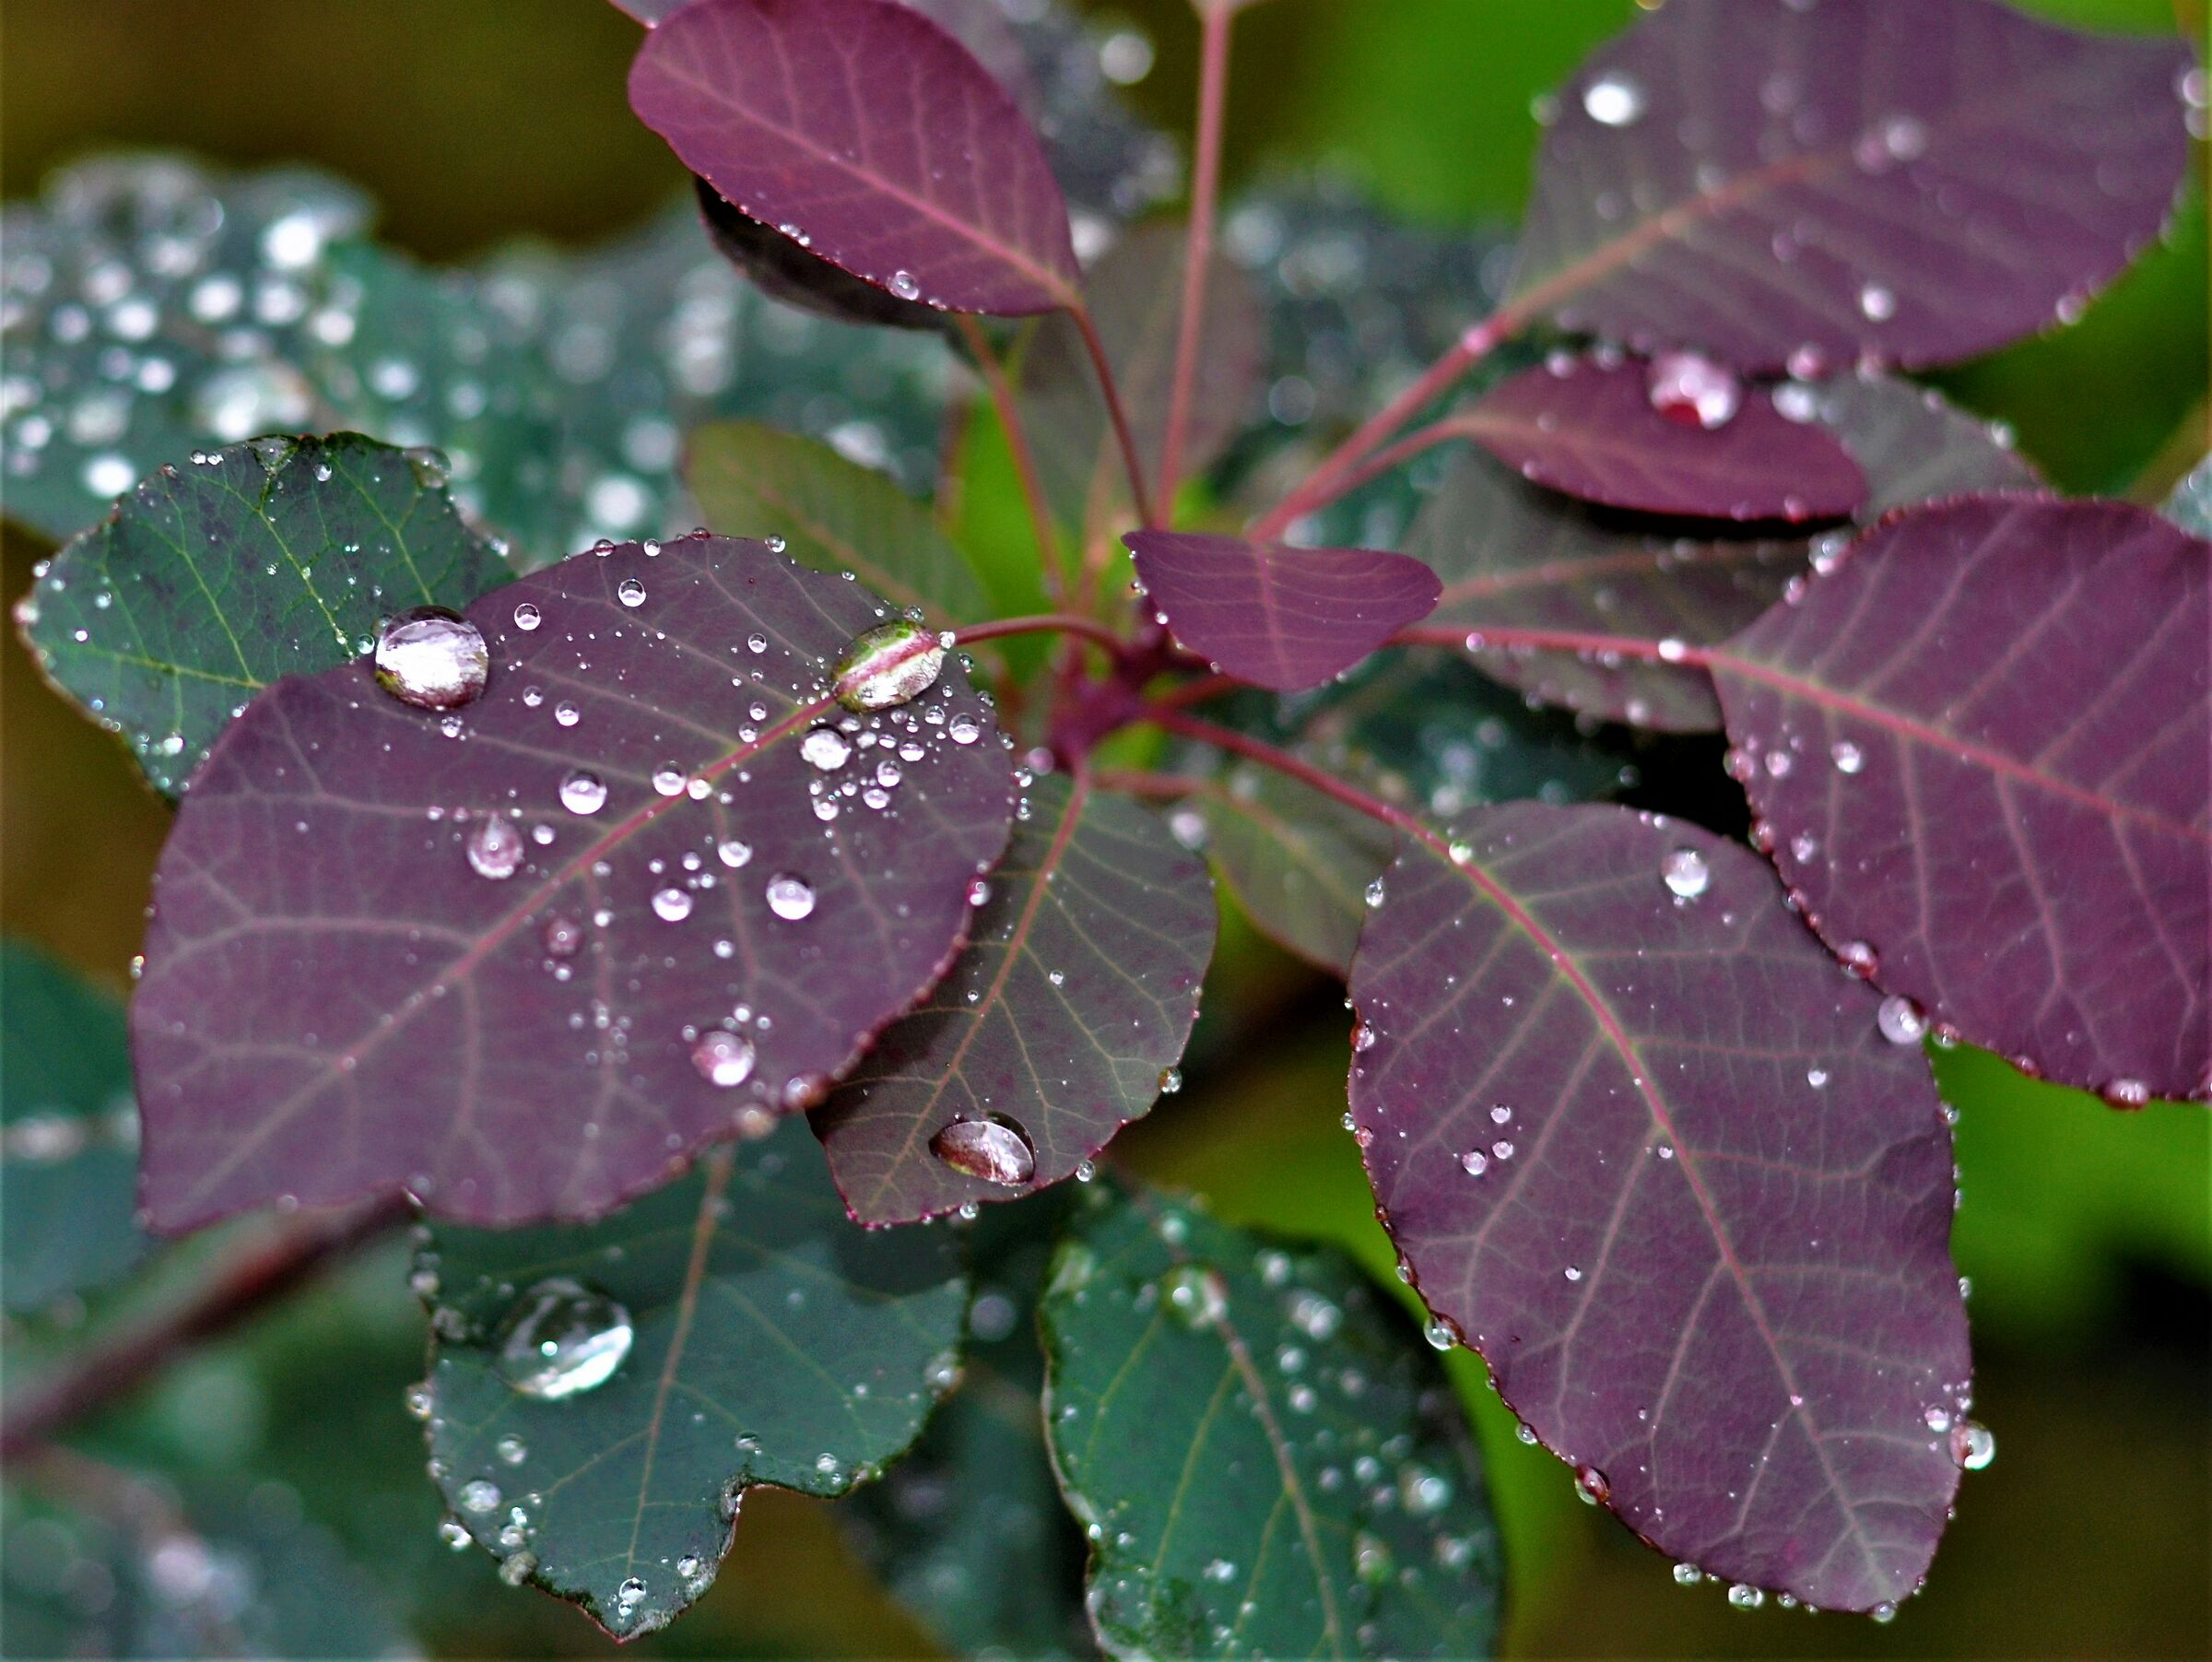 ... raindrops almost an embroidery... on the leaves...